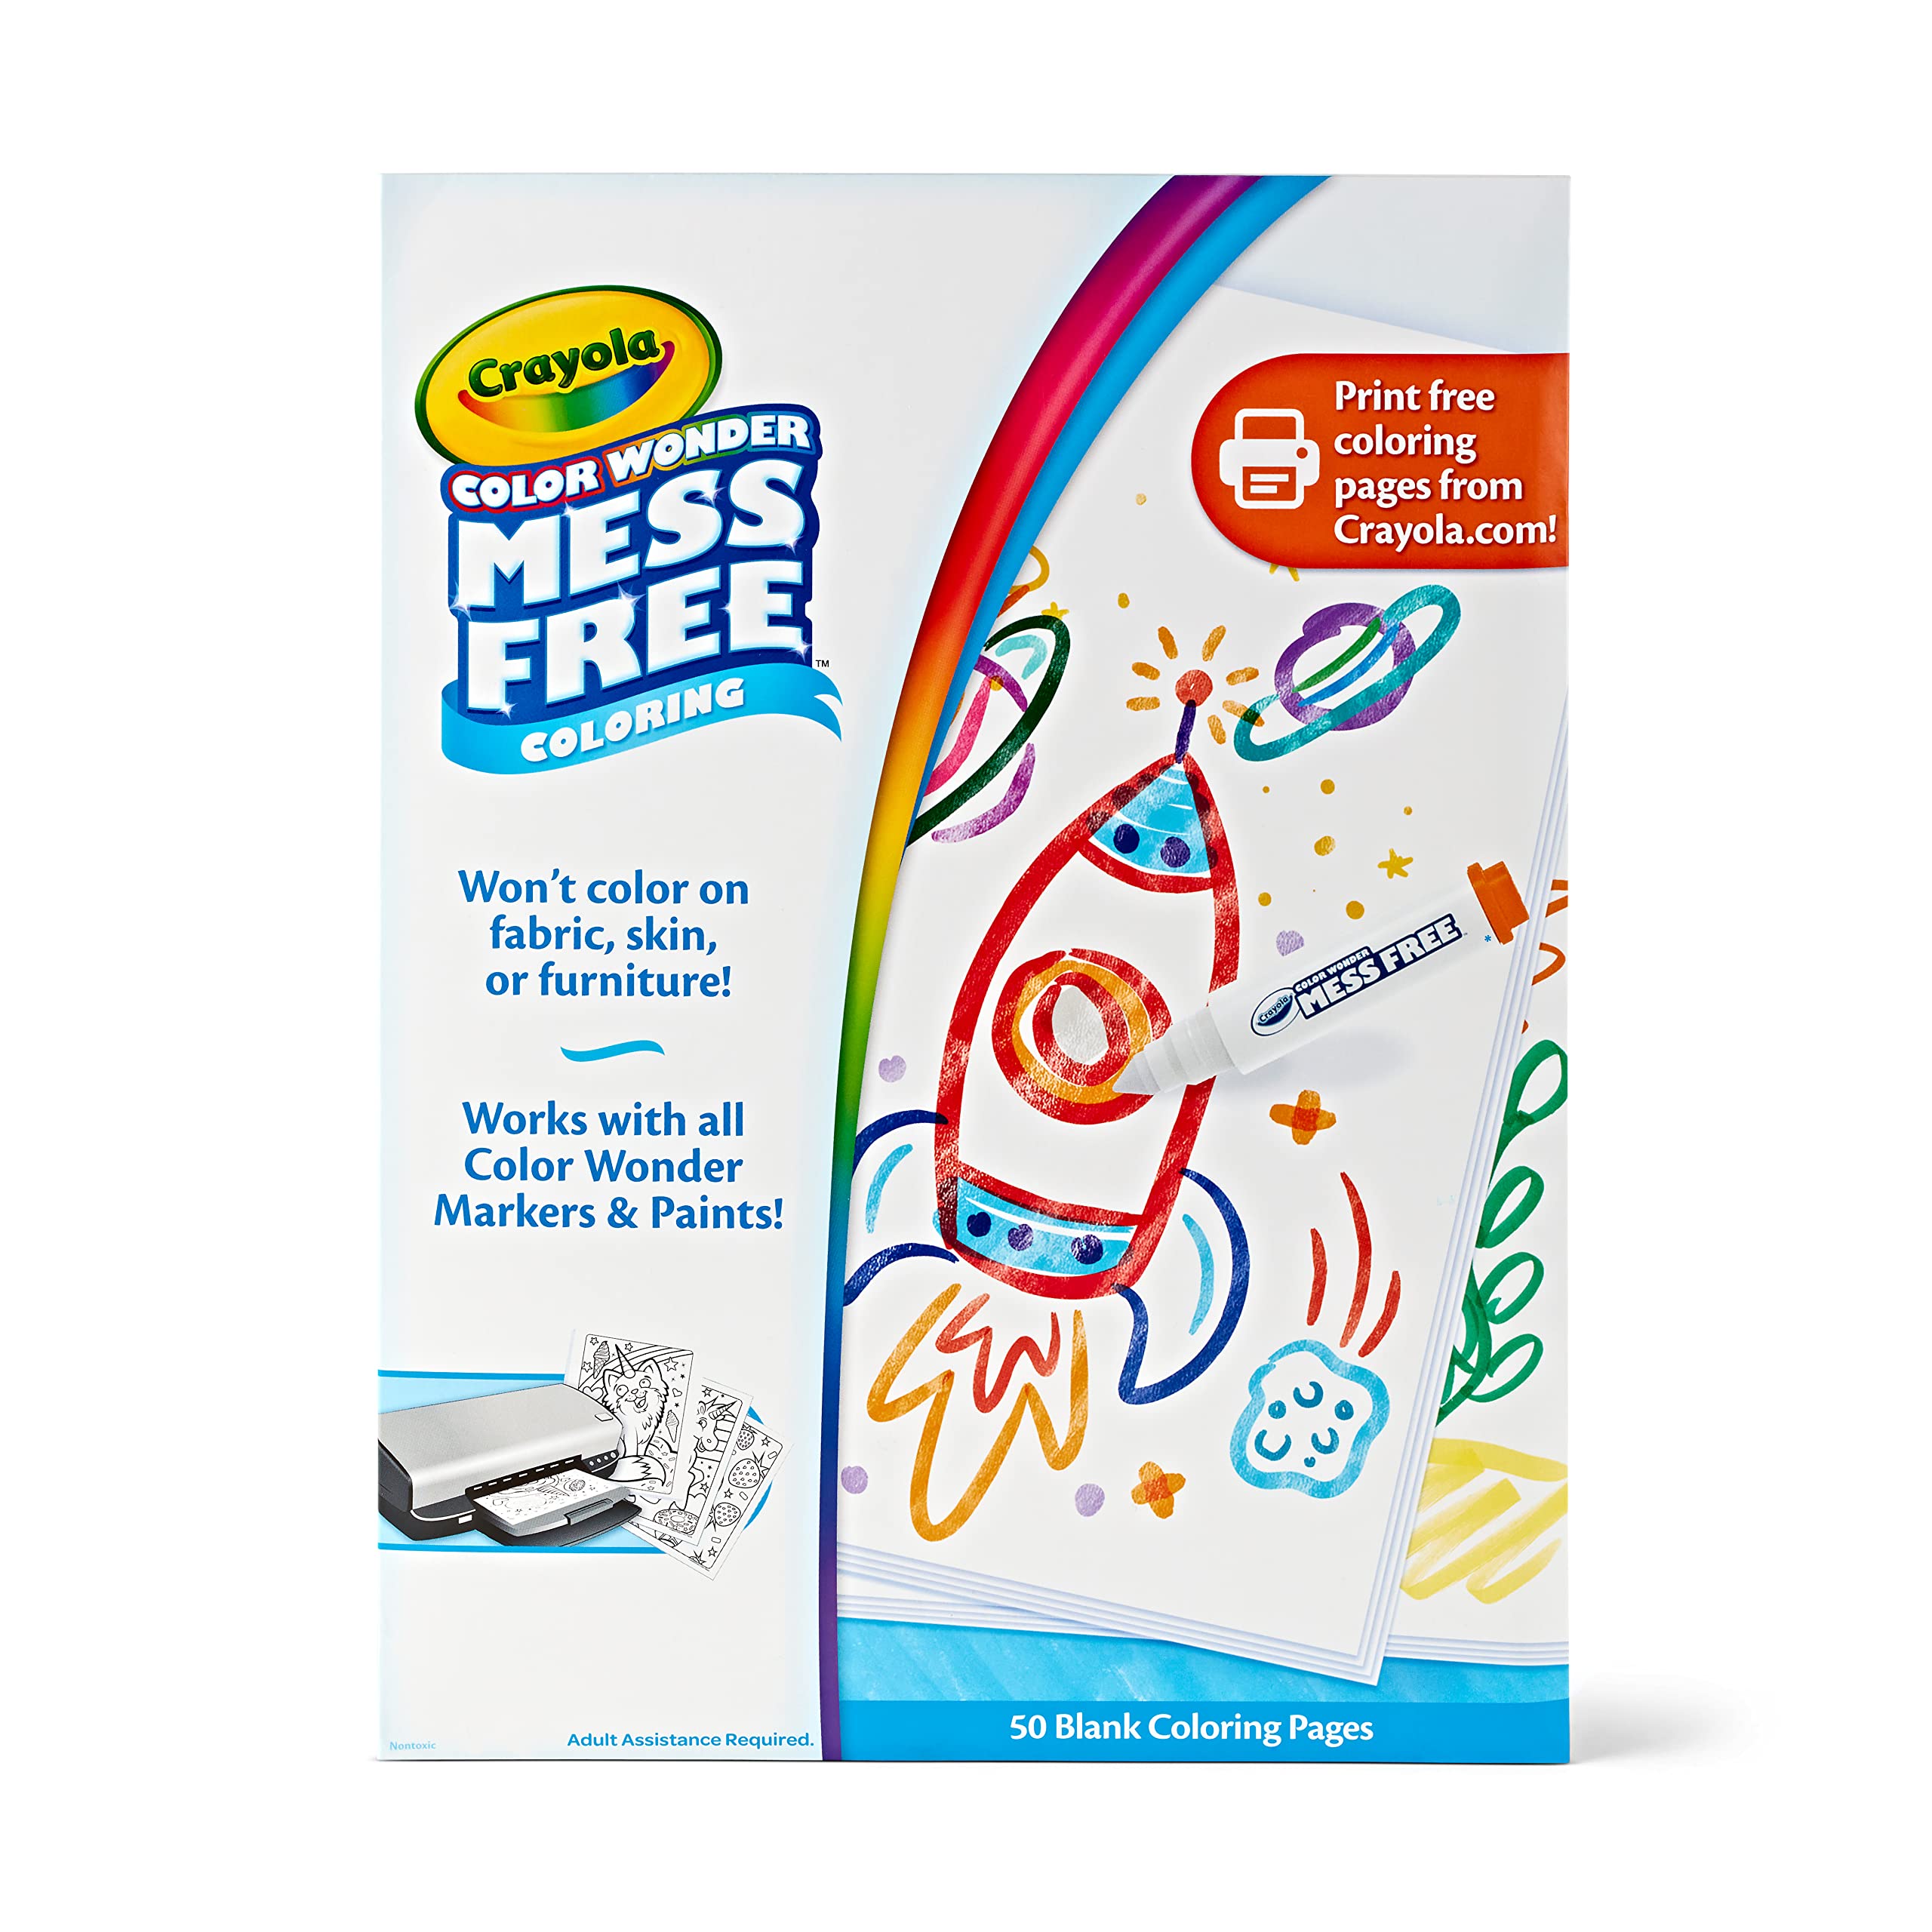 Crayola color wonder mess free coloring blank coloring pages count printable page refill set office products